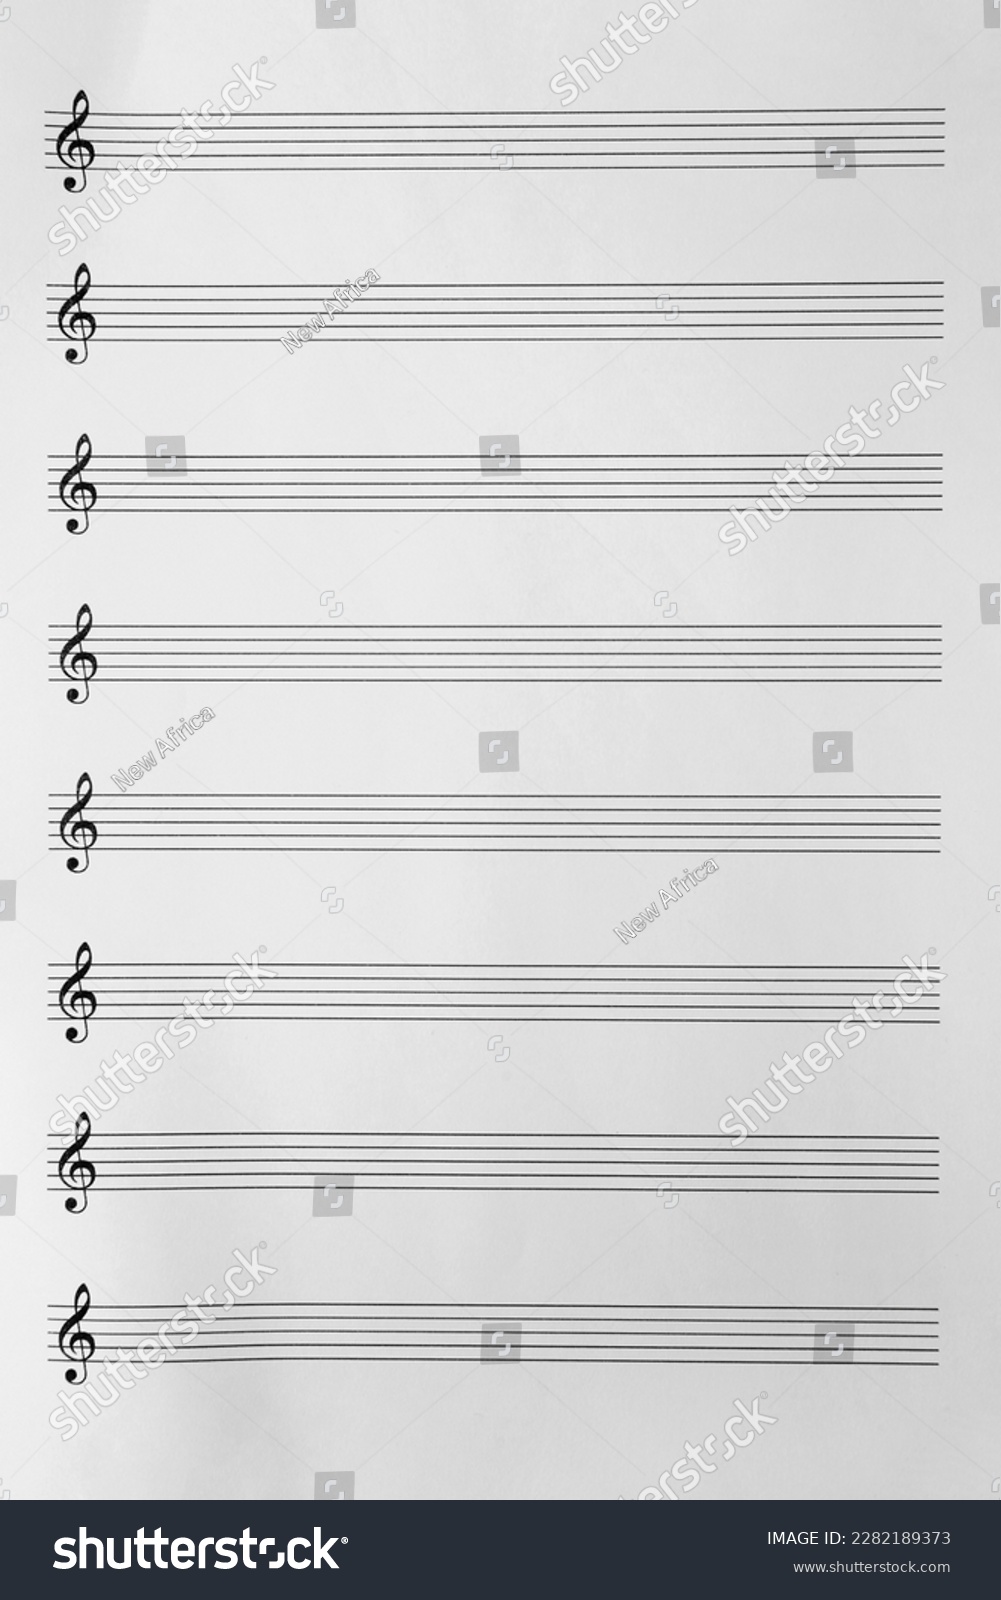 Sheet with empty staves for music notes and treble clef as background, top view #2282189373